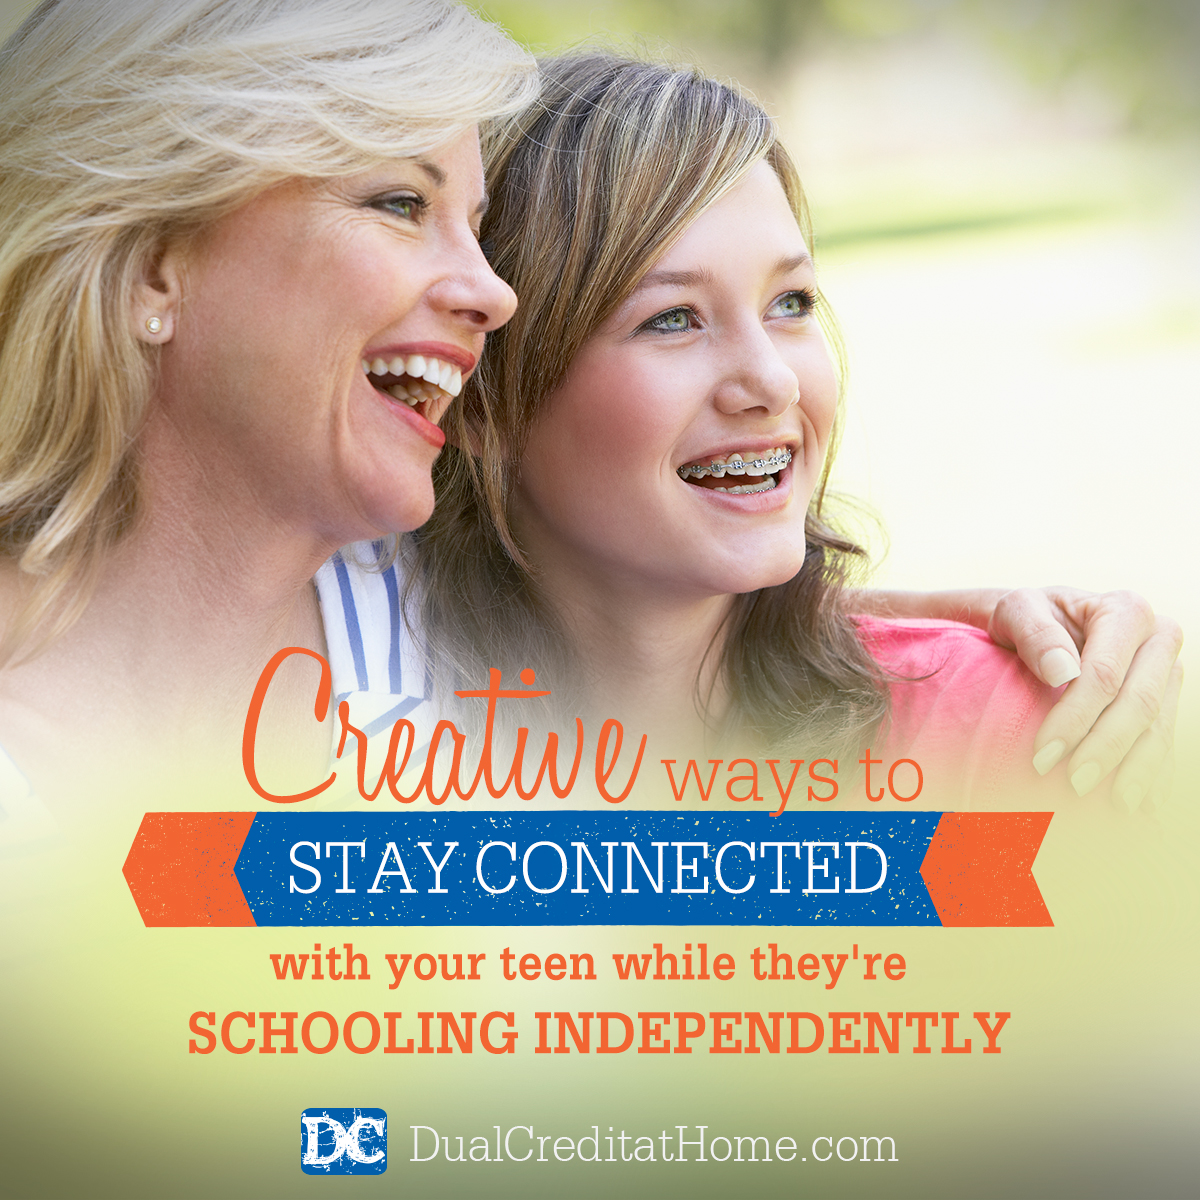 Creative Ways to Stay Connected With Your Teen While They’re Schooling Independently